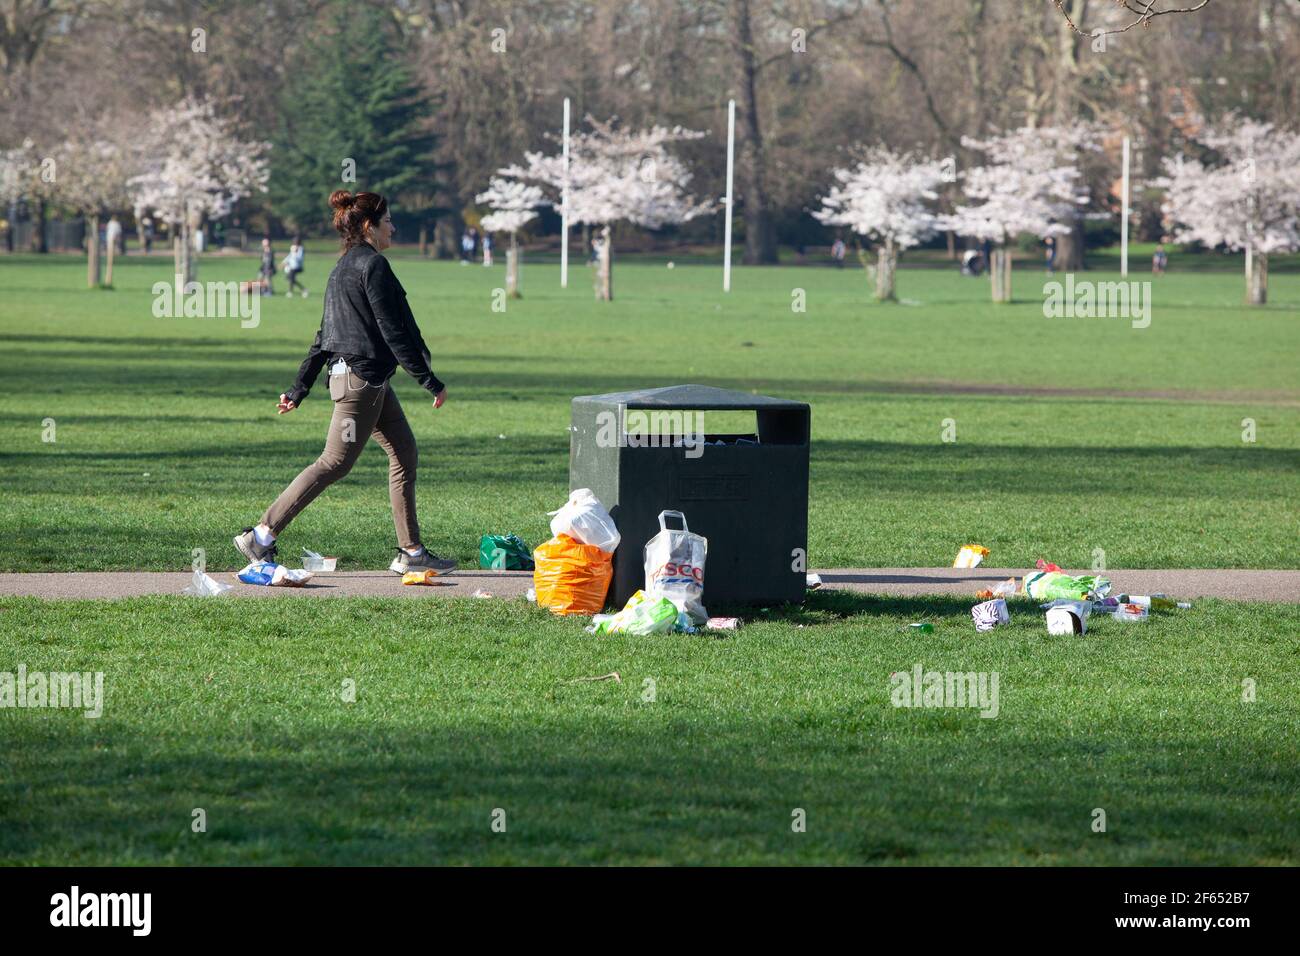 UK weather, London, 30 March 2021: In Battersea Park after one day of lock down rules being relaxed litter has accumulated by an over-flowing bin. Councils around the country are expecting extra pressure on public spaces throughout the summer. Anna Watson/Alamy Live News Stock Photo